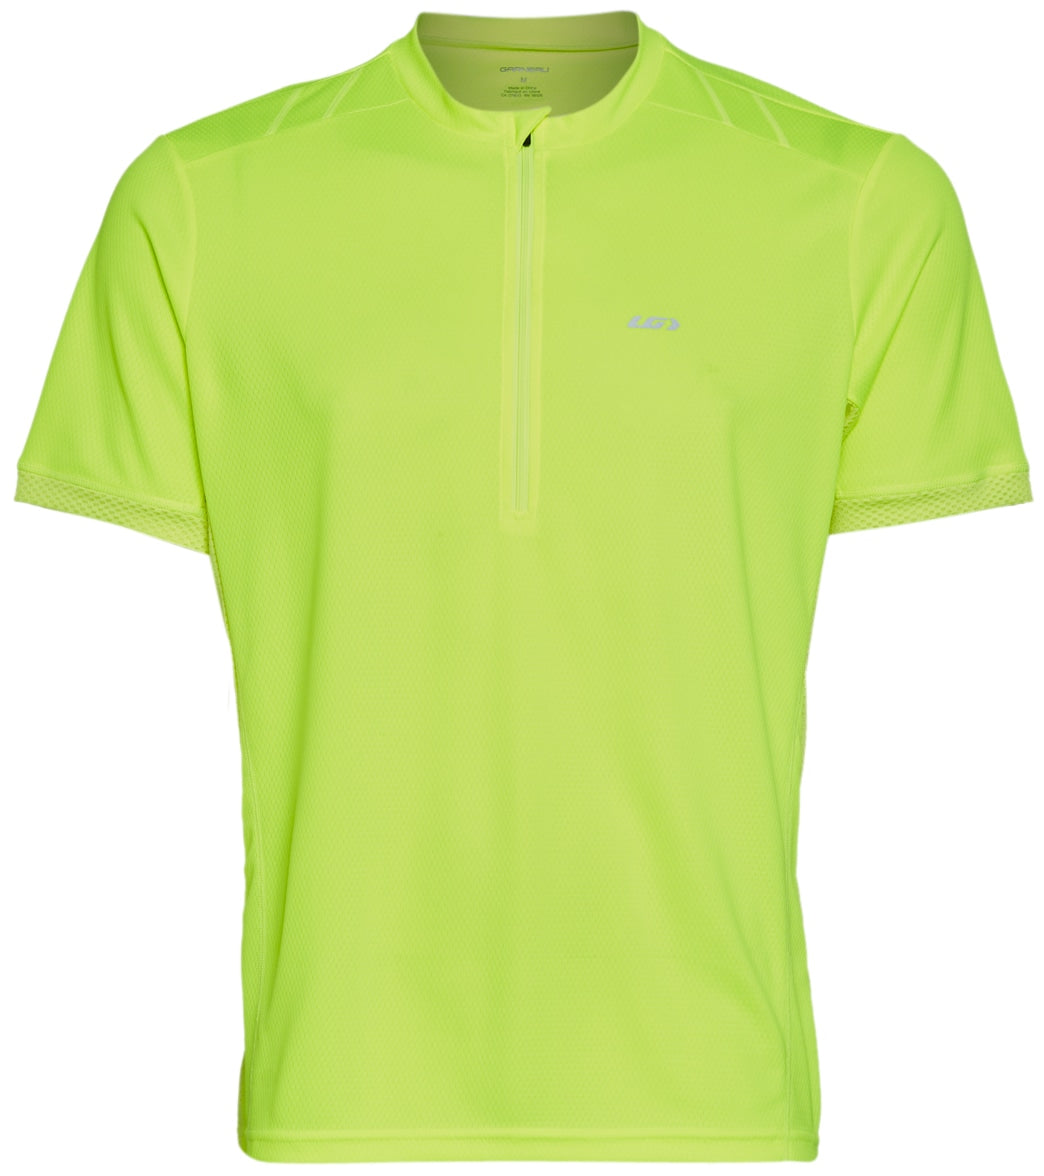 Louis Garneau Men's Connection 2 Cycling Jersey - Bright Yellow Small Size Small - Swimoutlet.com